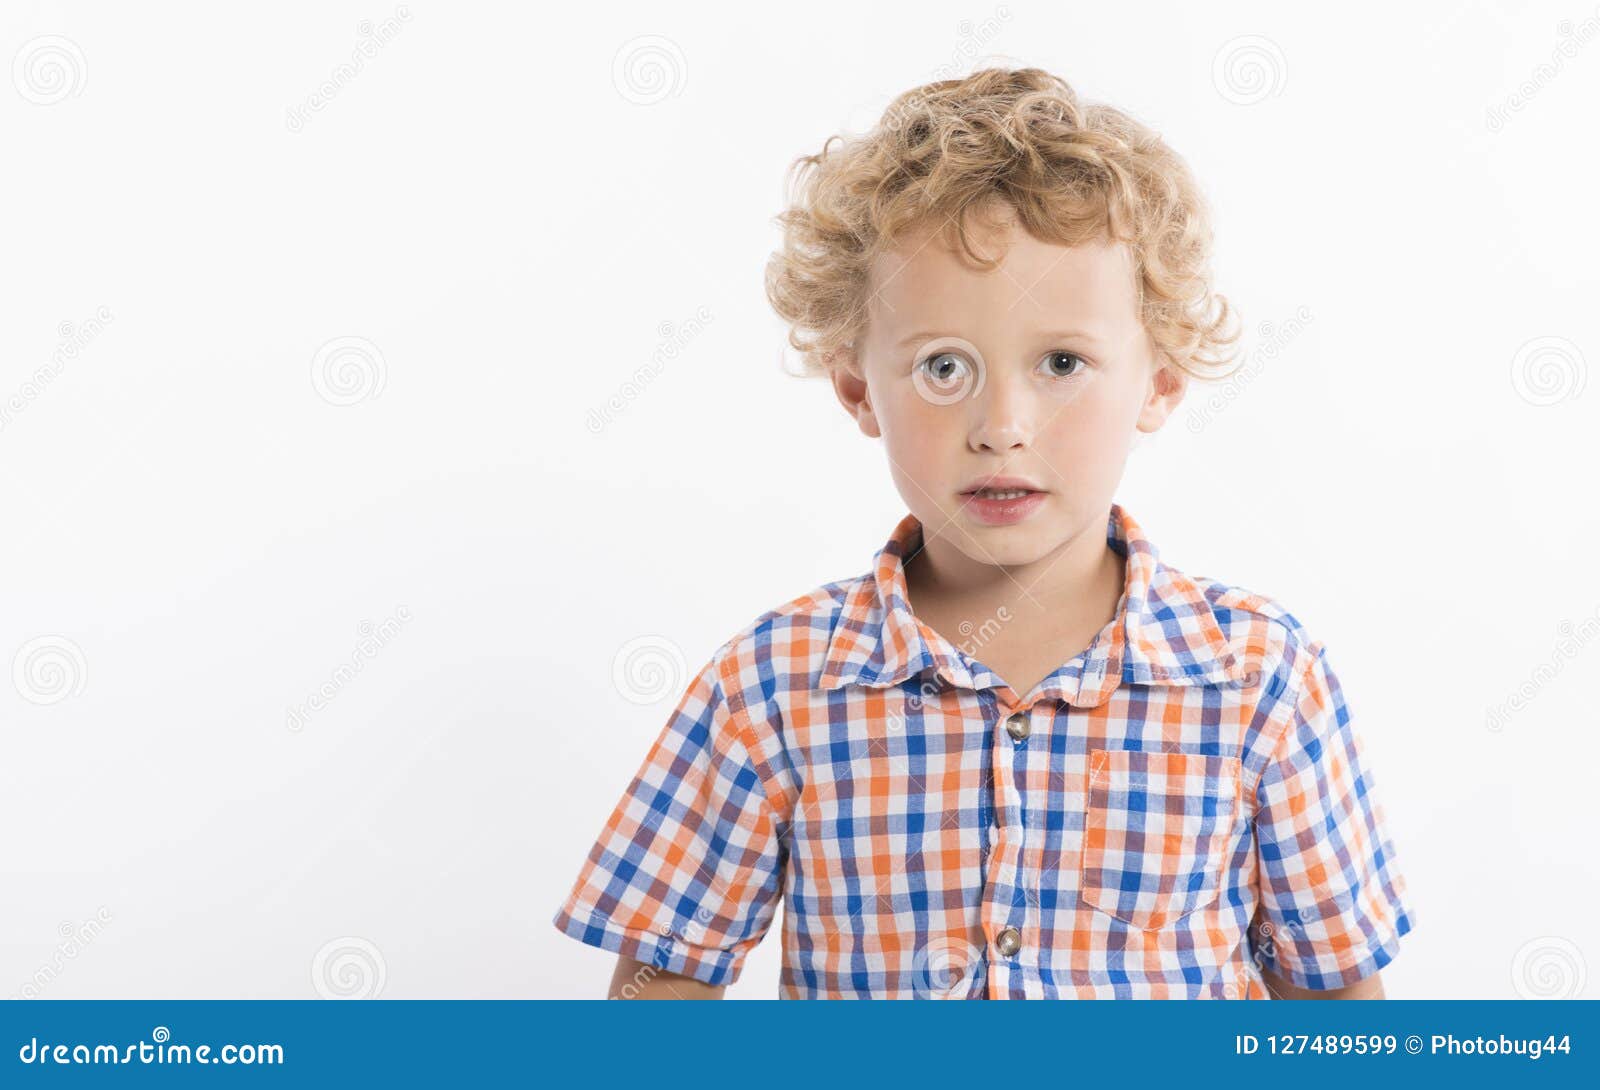 Beautiful Boy With Blonde Curls Stock Image Image Of Plaid Hair